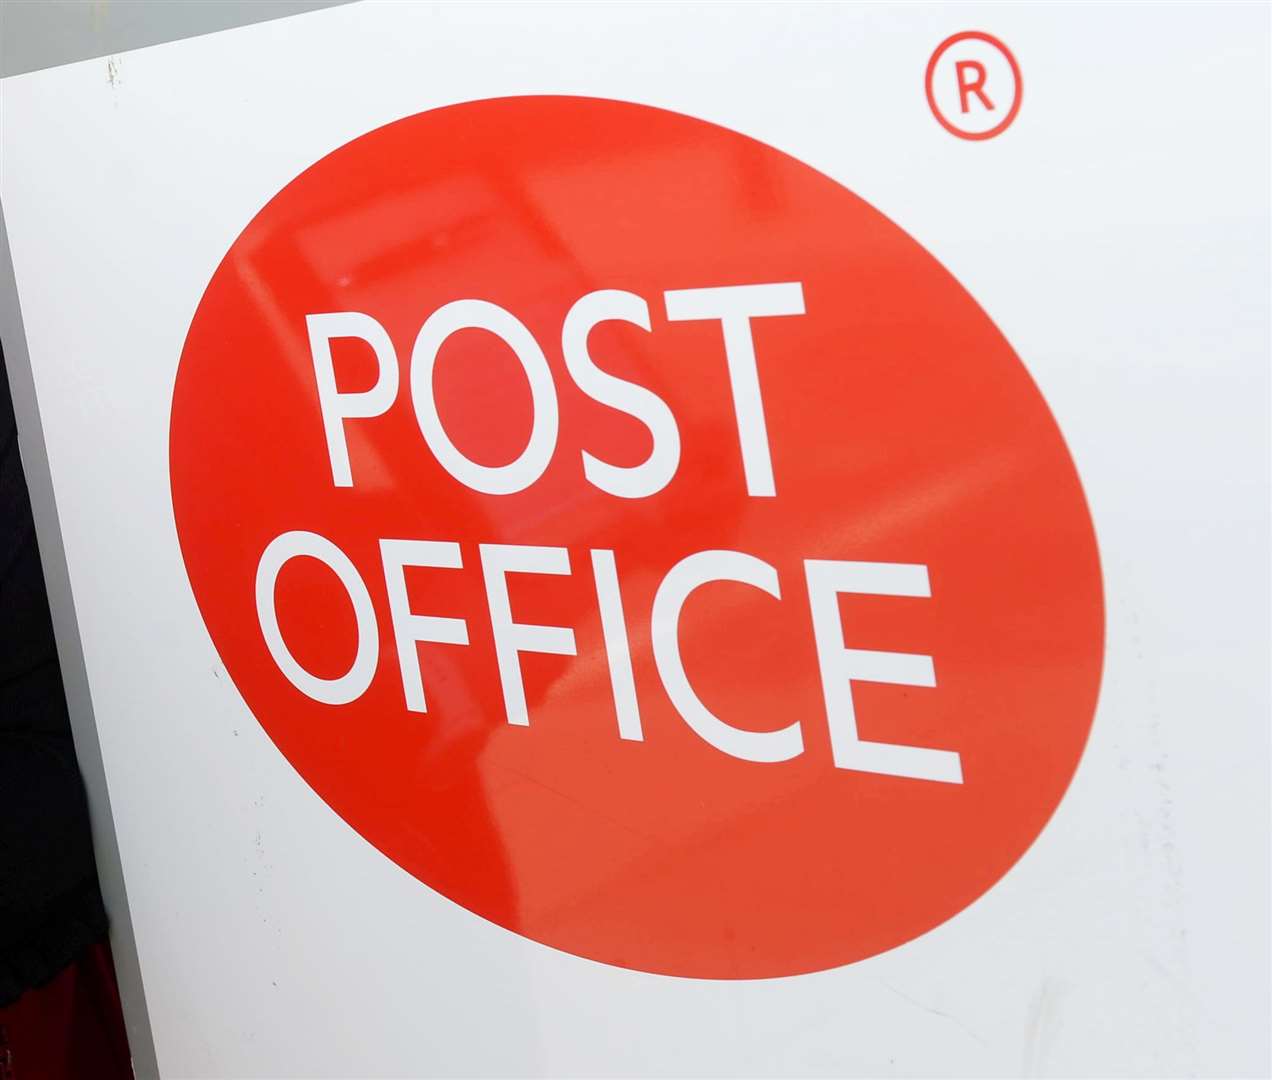 Post Office services will be retained in the town.